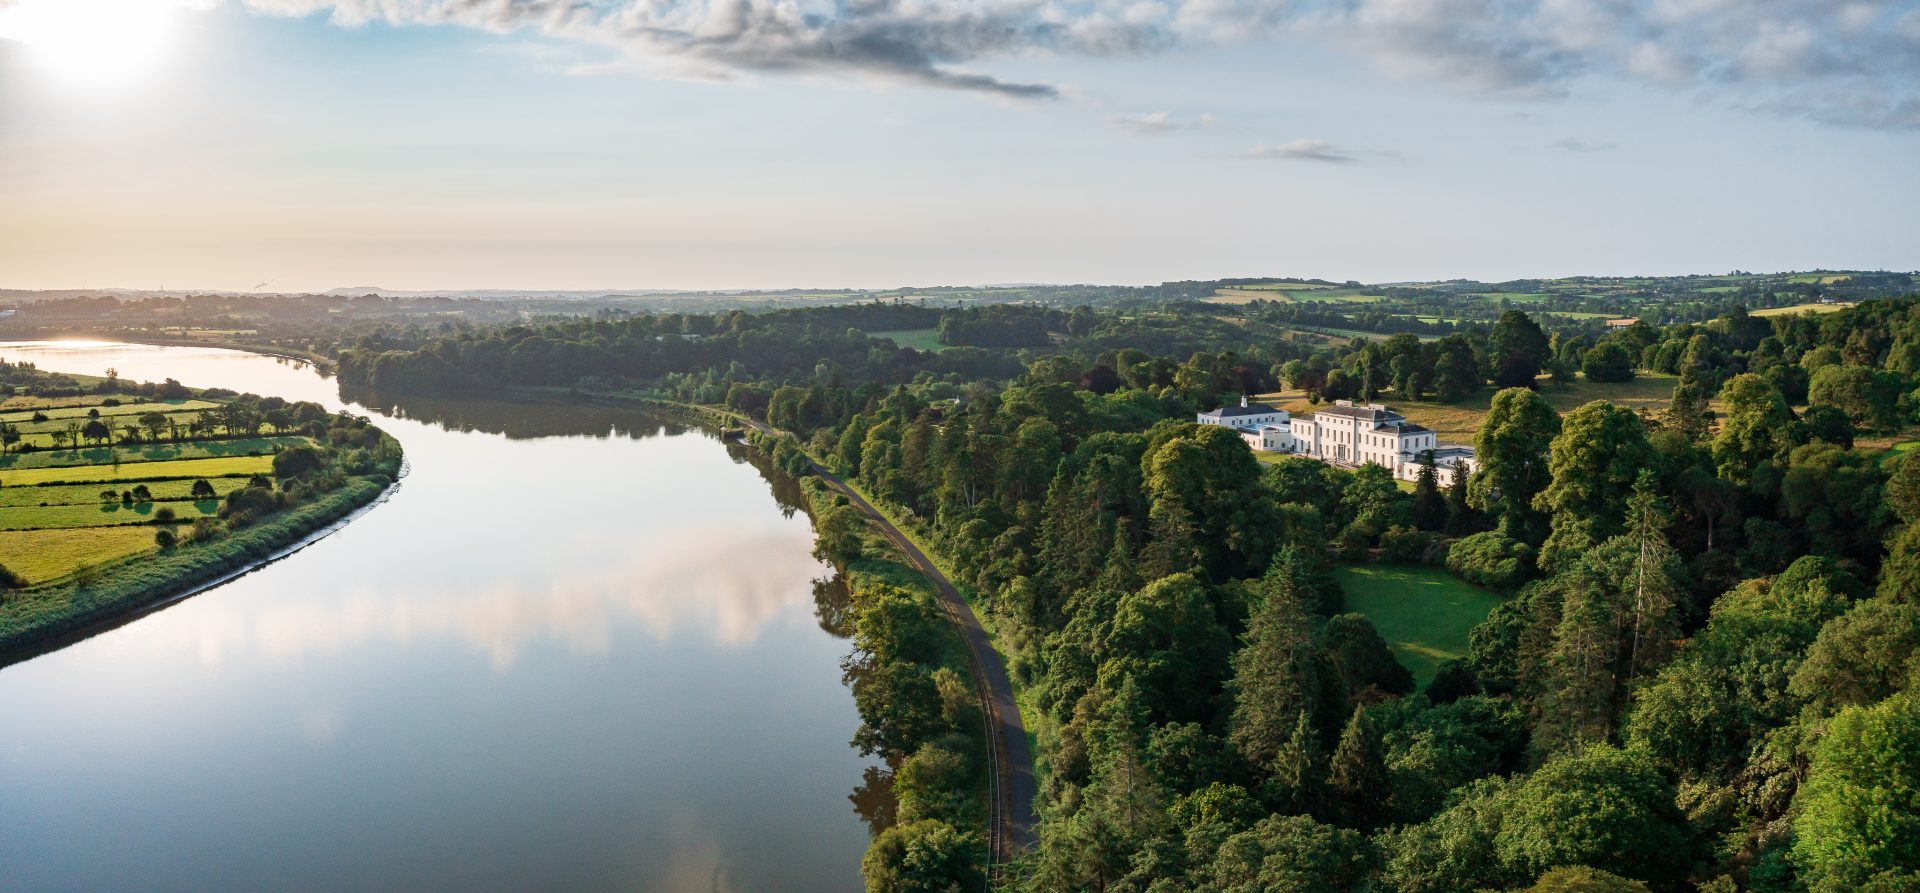 Mount Congreve Gardens listed by Conde Nast Traveller in their ‘Best Place To Go’ 2024